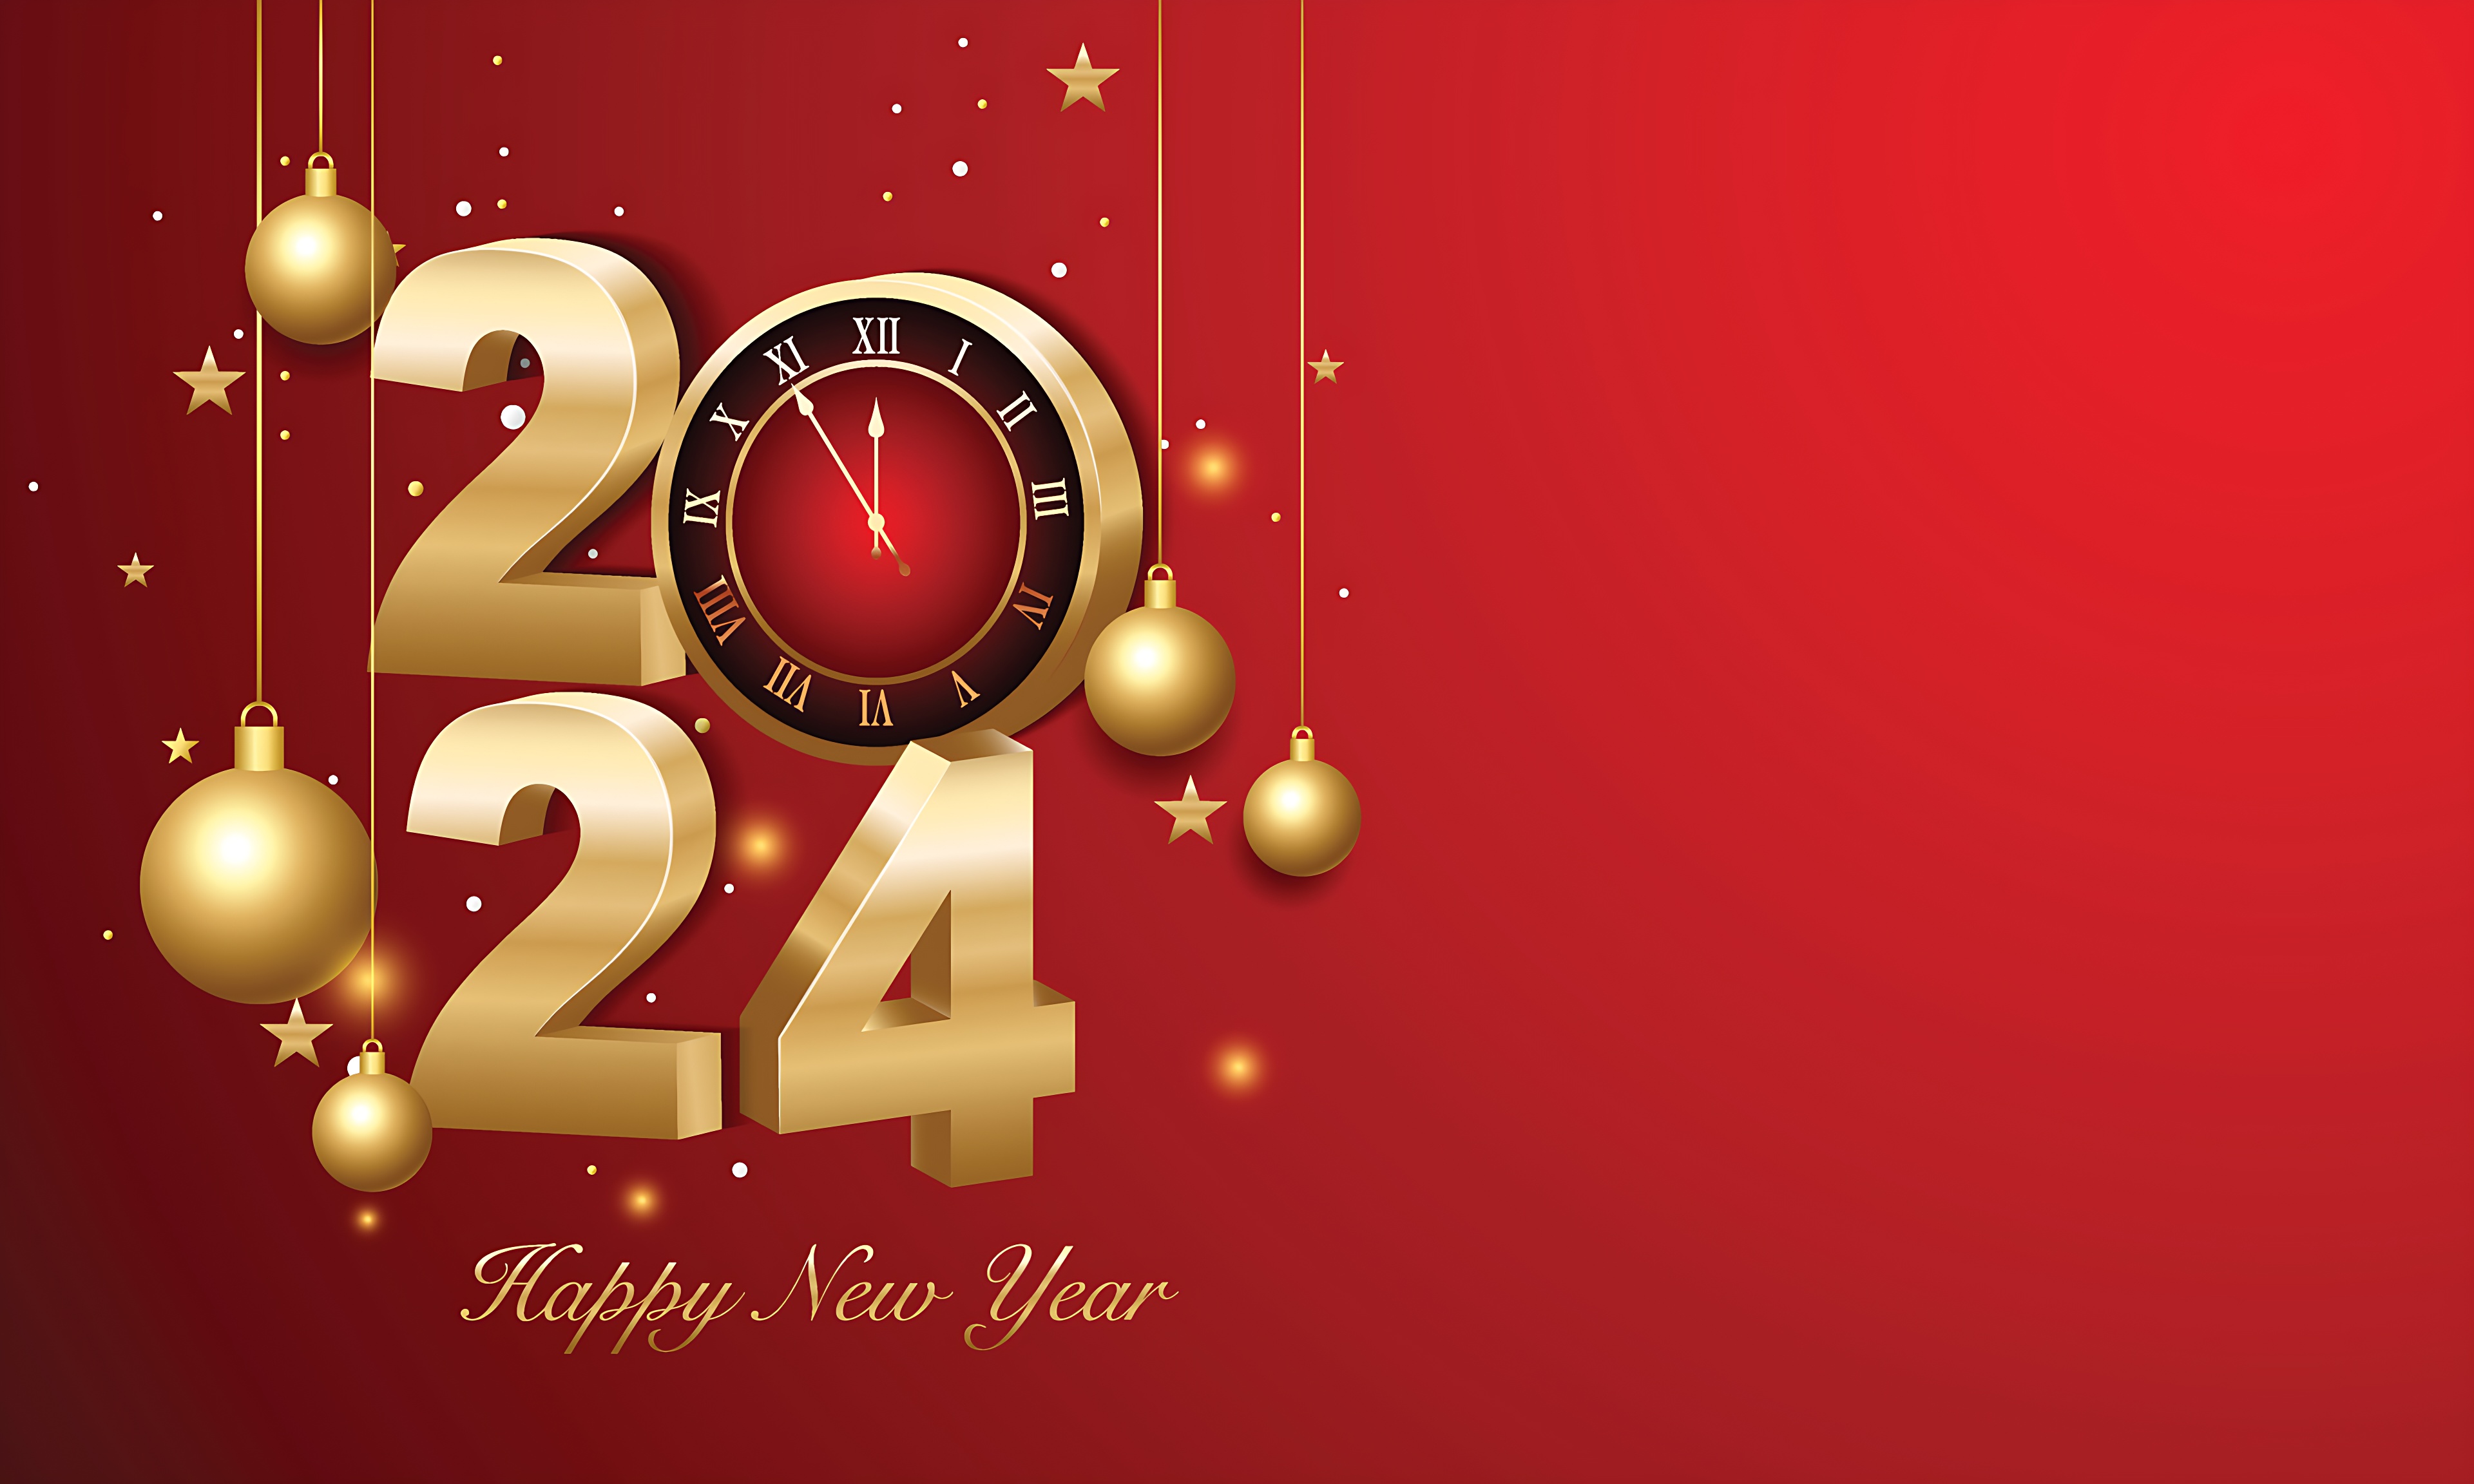 New Year 2024 4k Ultra HD Wallpaper Gold Letter And Number Wishes.Photos